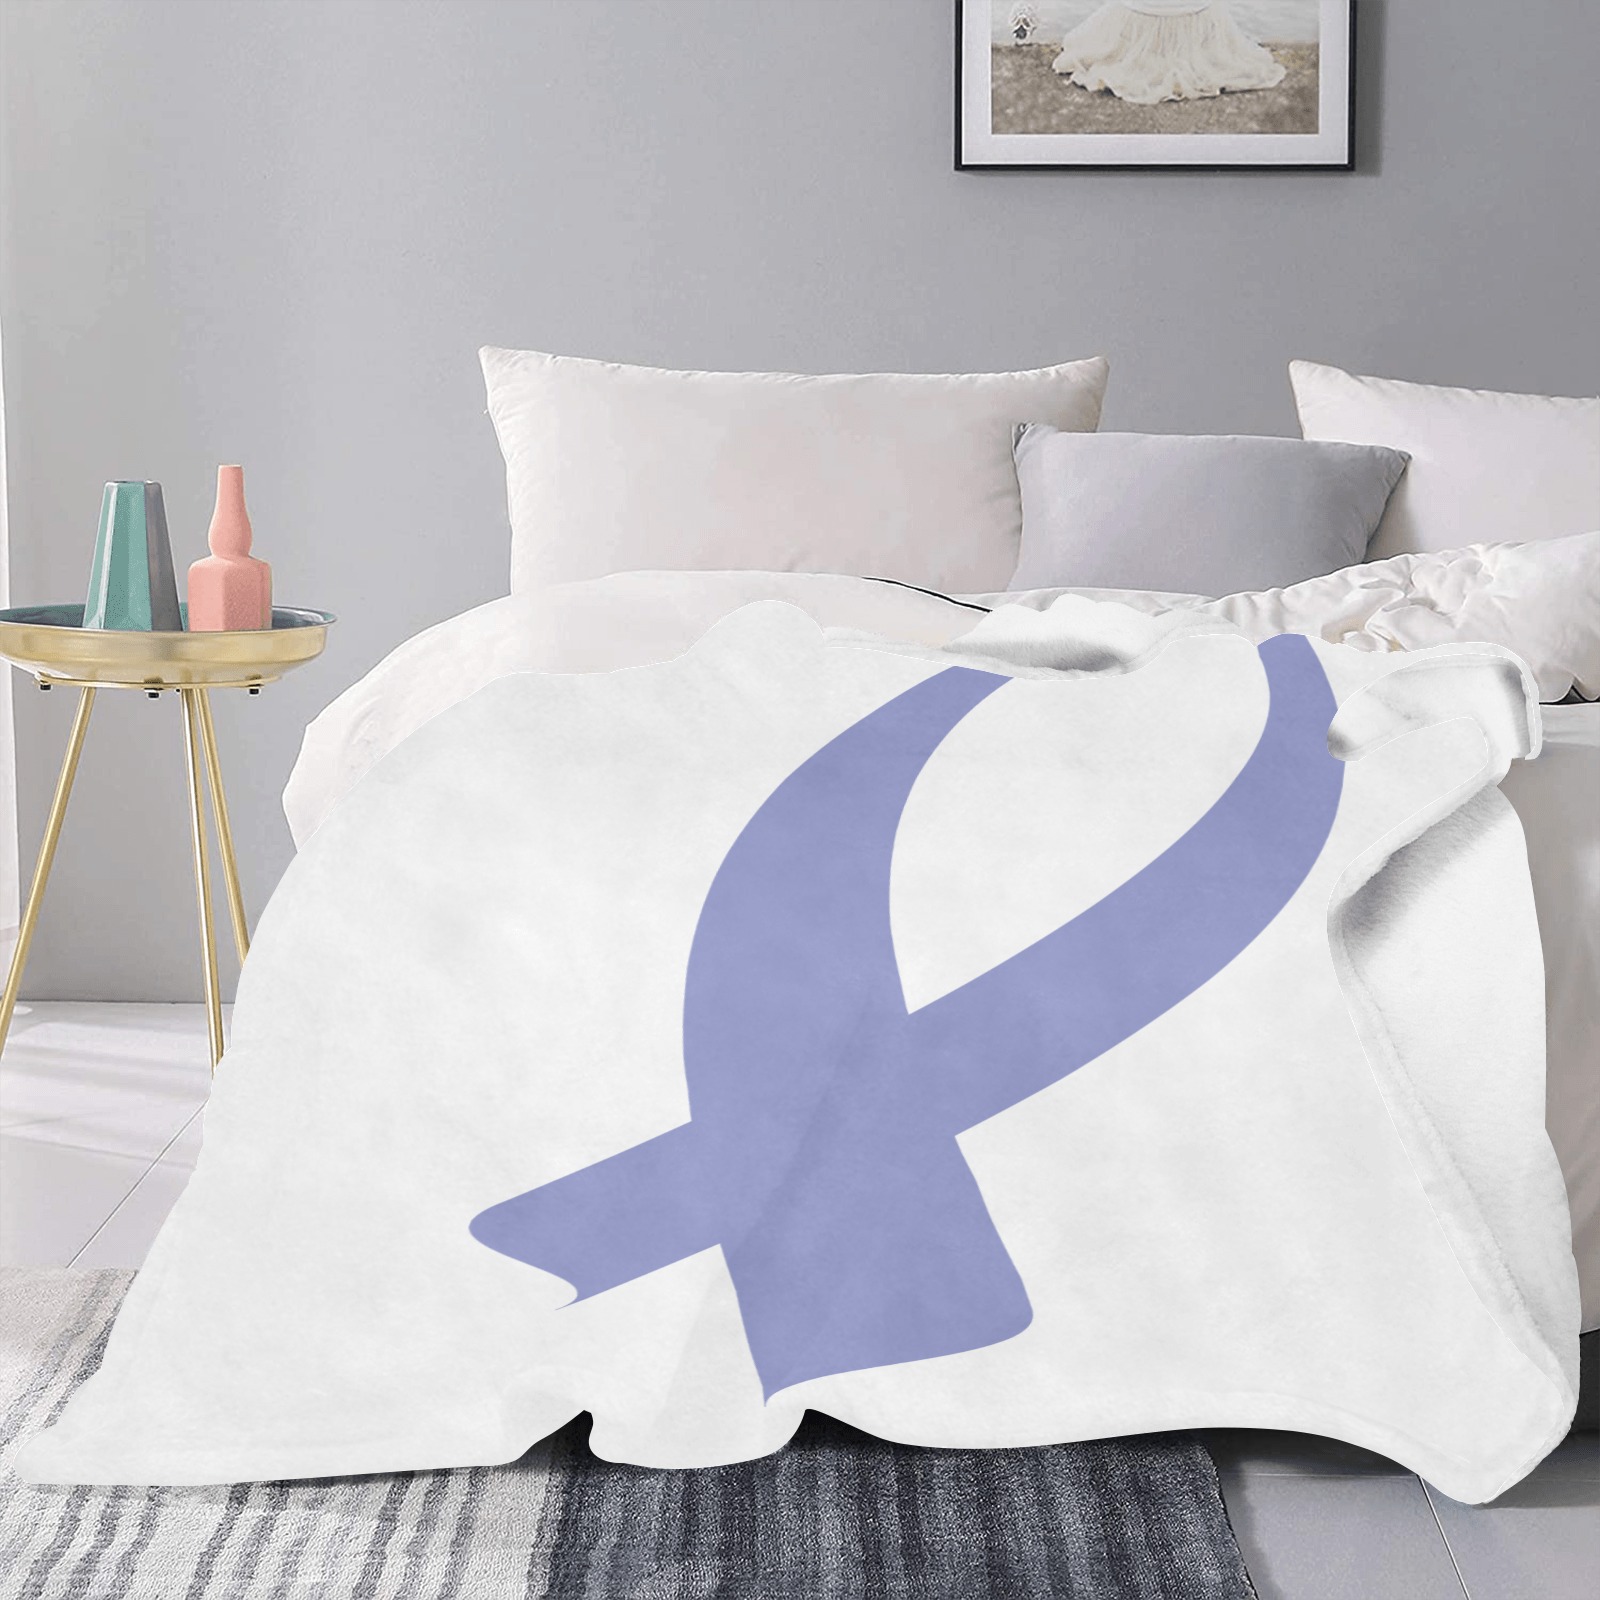 Awareness Ribbon (Periwinkle) Ultra-Soft Micro Fleece Blanket 30"x40" (Thick)